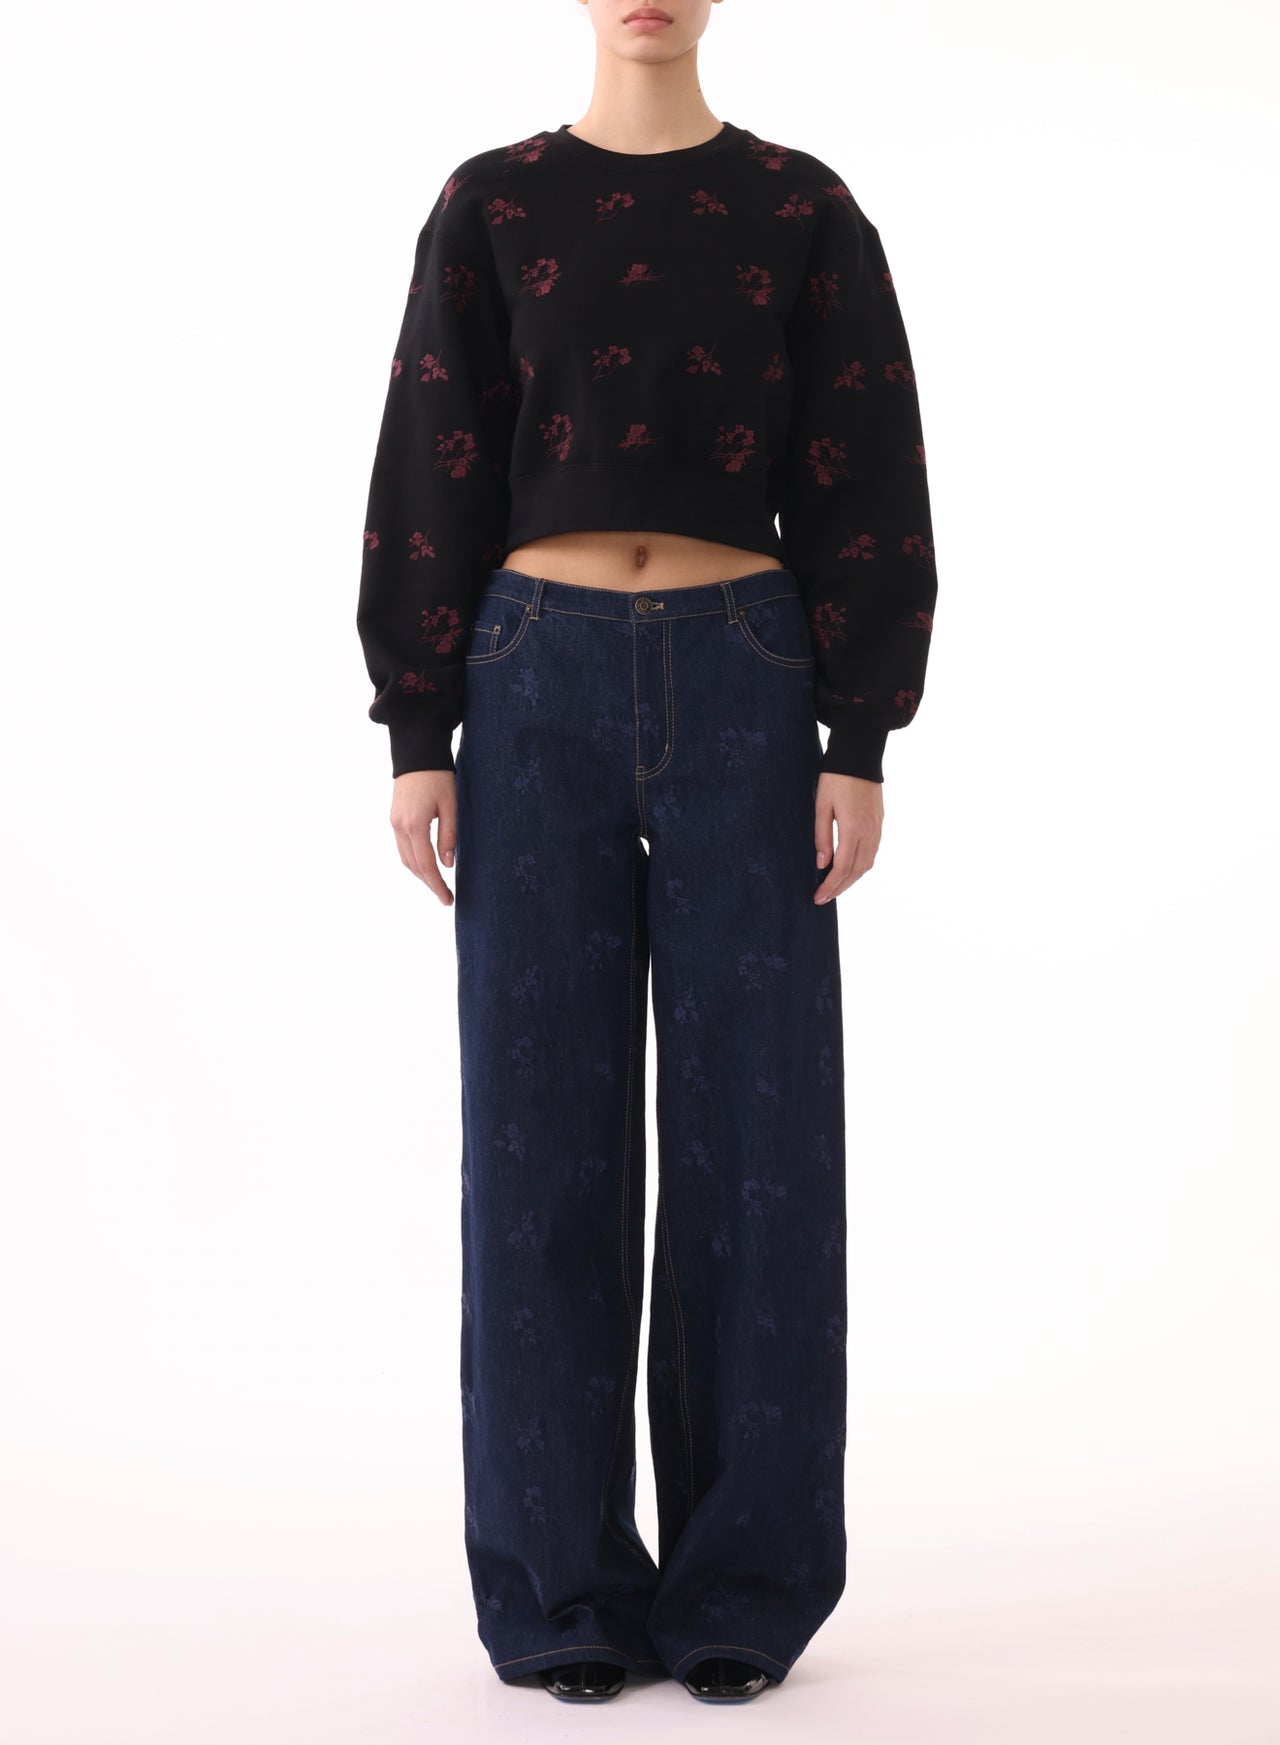 LONG SLEEVE SWEATSHIRT W/ FLORAL EMBROIDERY view 2